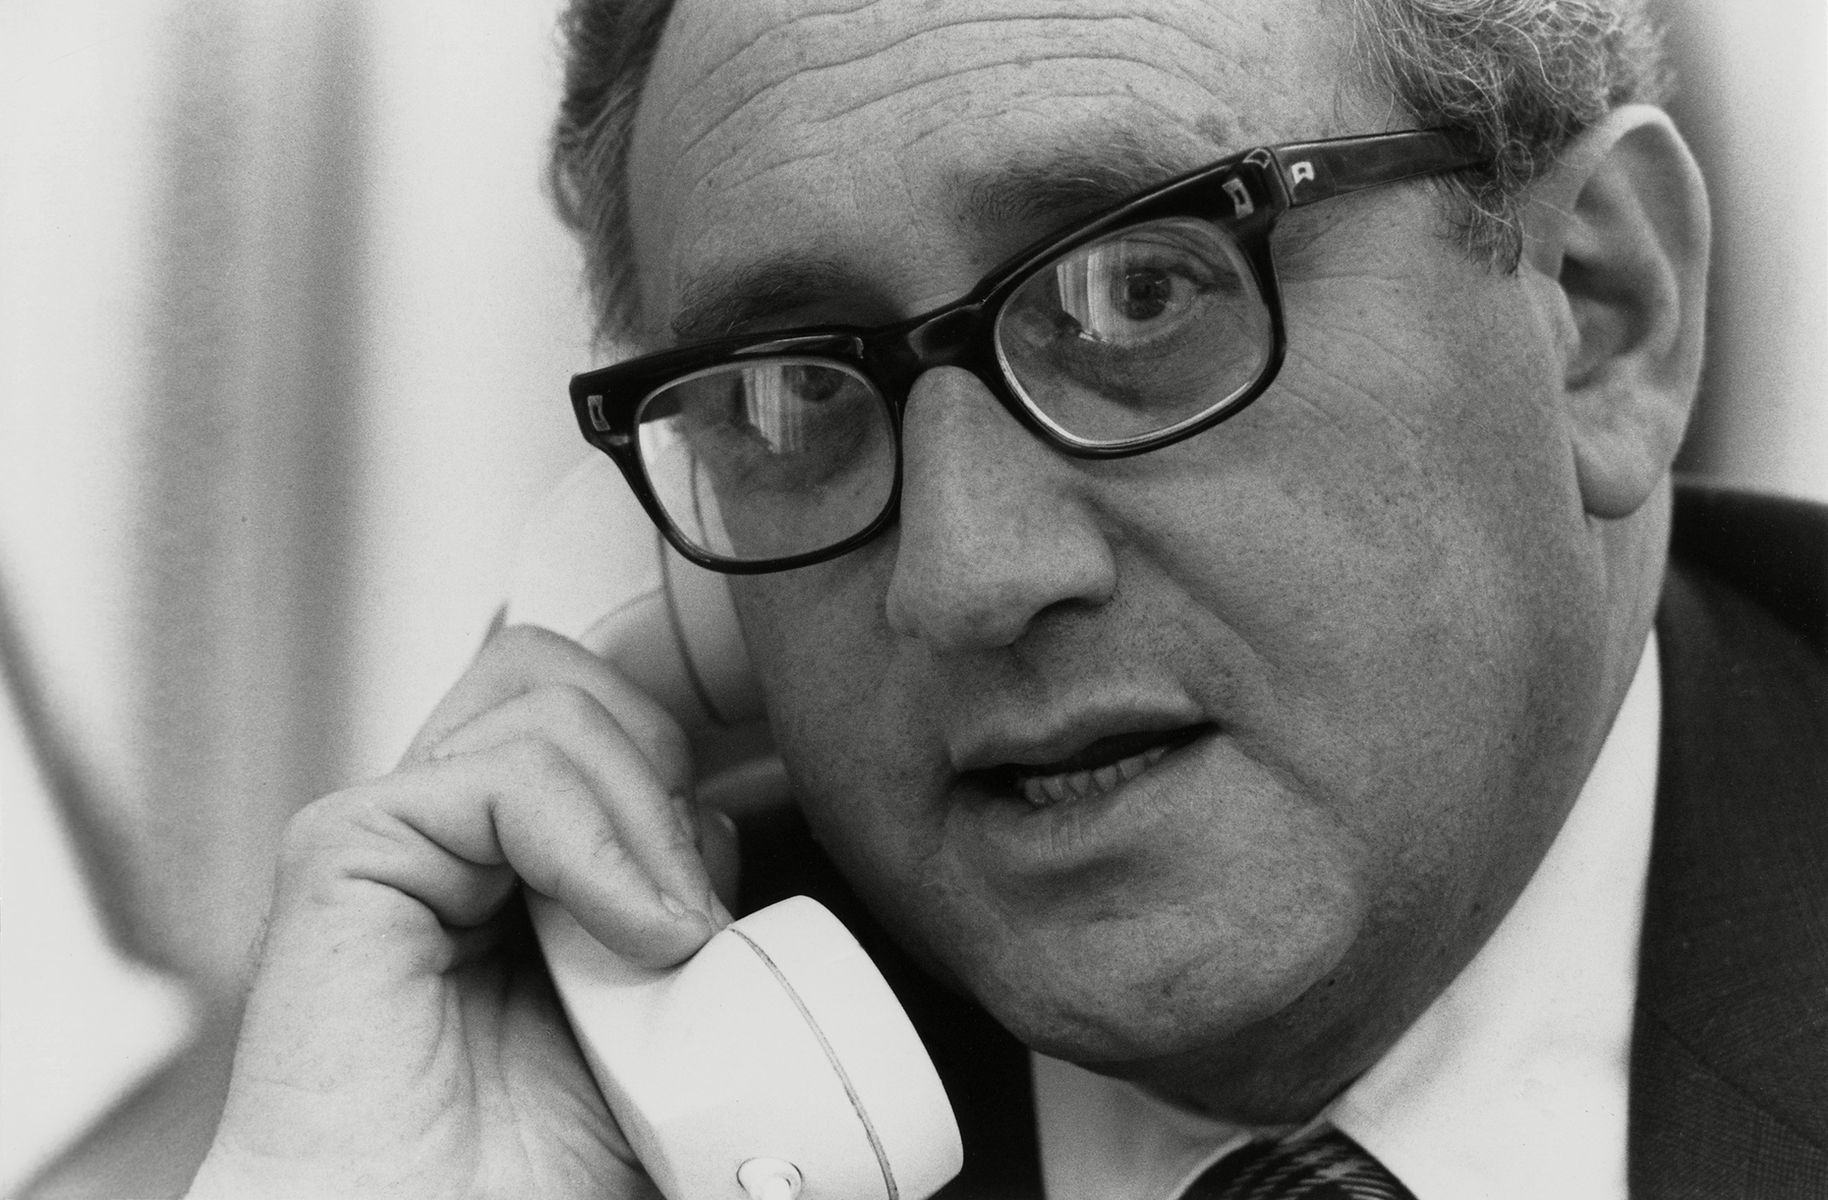 U.S. Secretary of State from 1973 to 1977 and recipient of the Nobel Peace Prize for his role in ending the Vietnam War, <a href="https://www.britannica.com/biography/Henry-Kissinger" rel="noreferrer noopener">Henry Kissinger</a> has been <a href="https://www.salon.com/2015/11/10/henry_kissingers_genocidal_legacy_partner/" rel="noreferrer noopener">accused of</a> supporting dictators, illegal invasions, and massacres. His policies have had devastating effects in Cambodia, Chile, East Timor, and other locations.